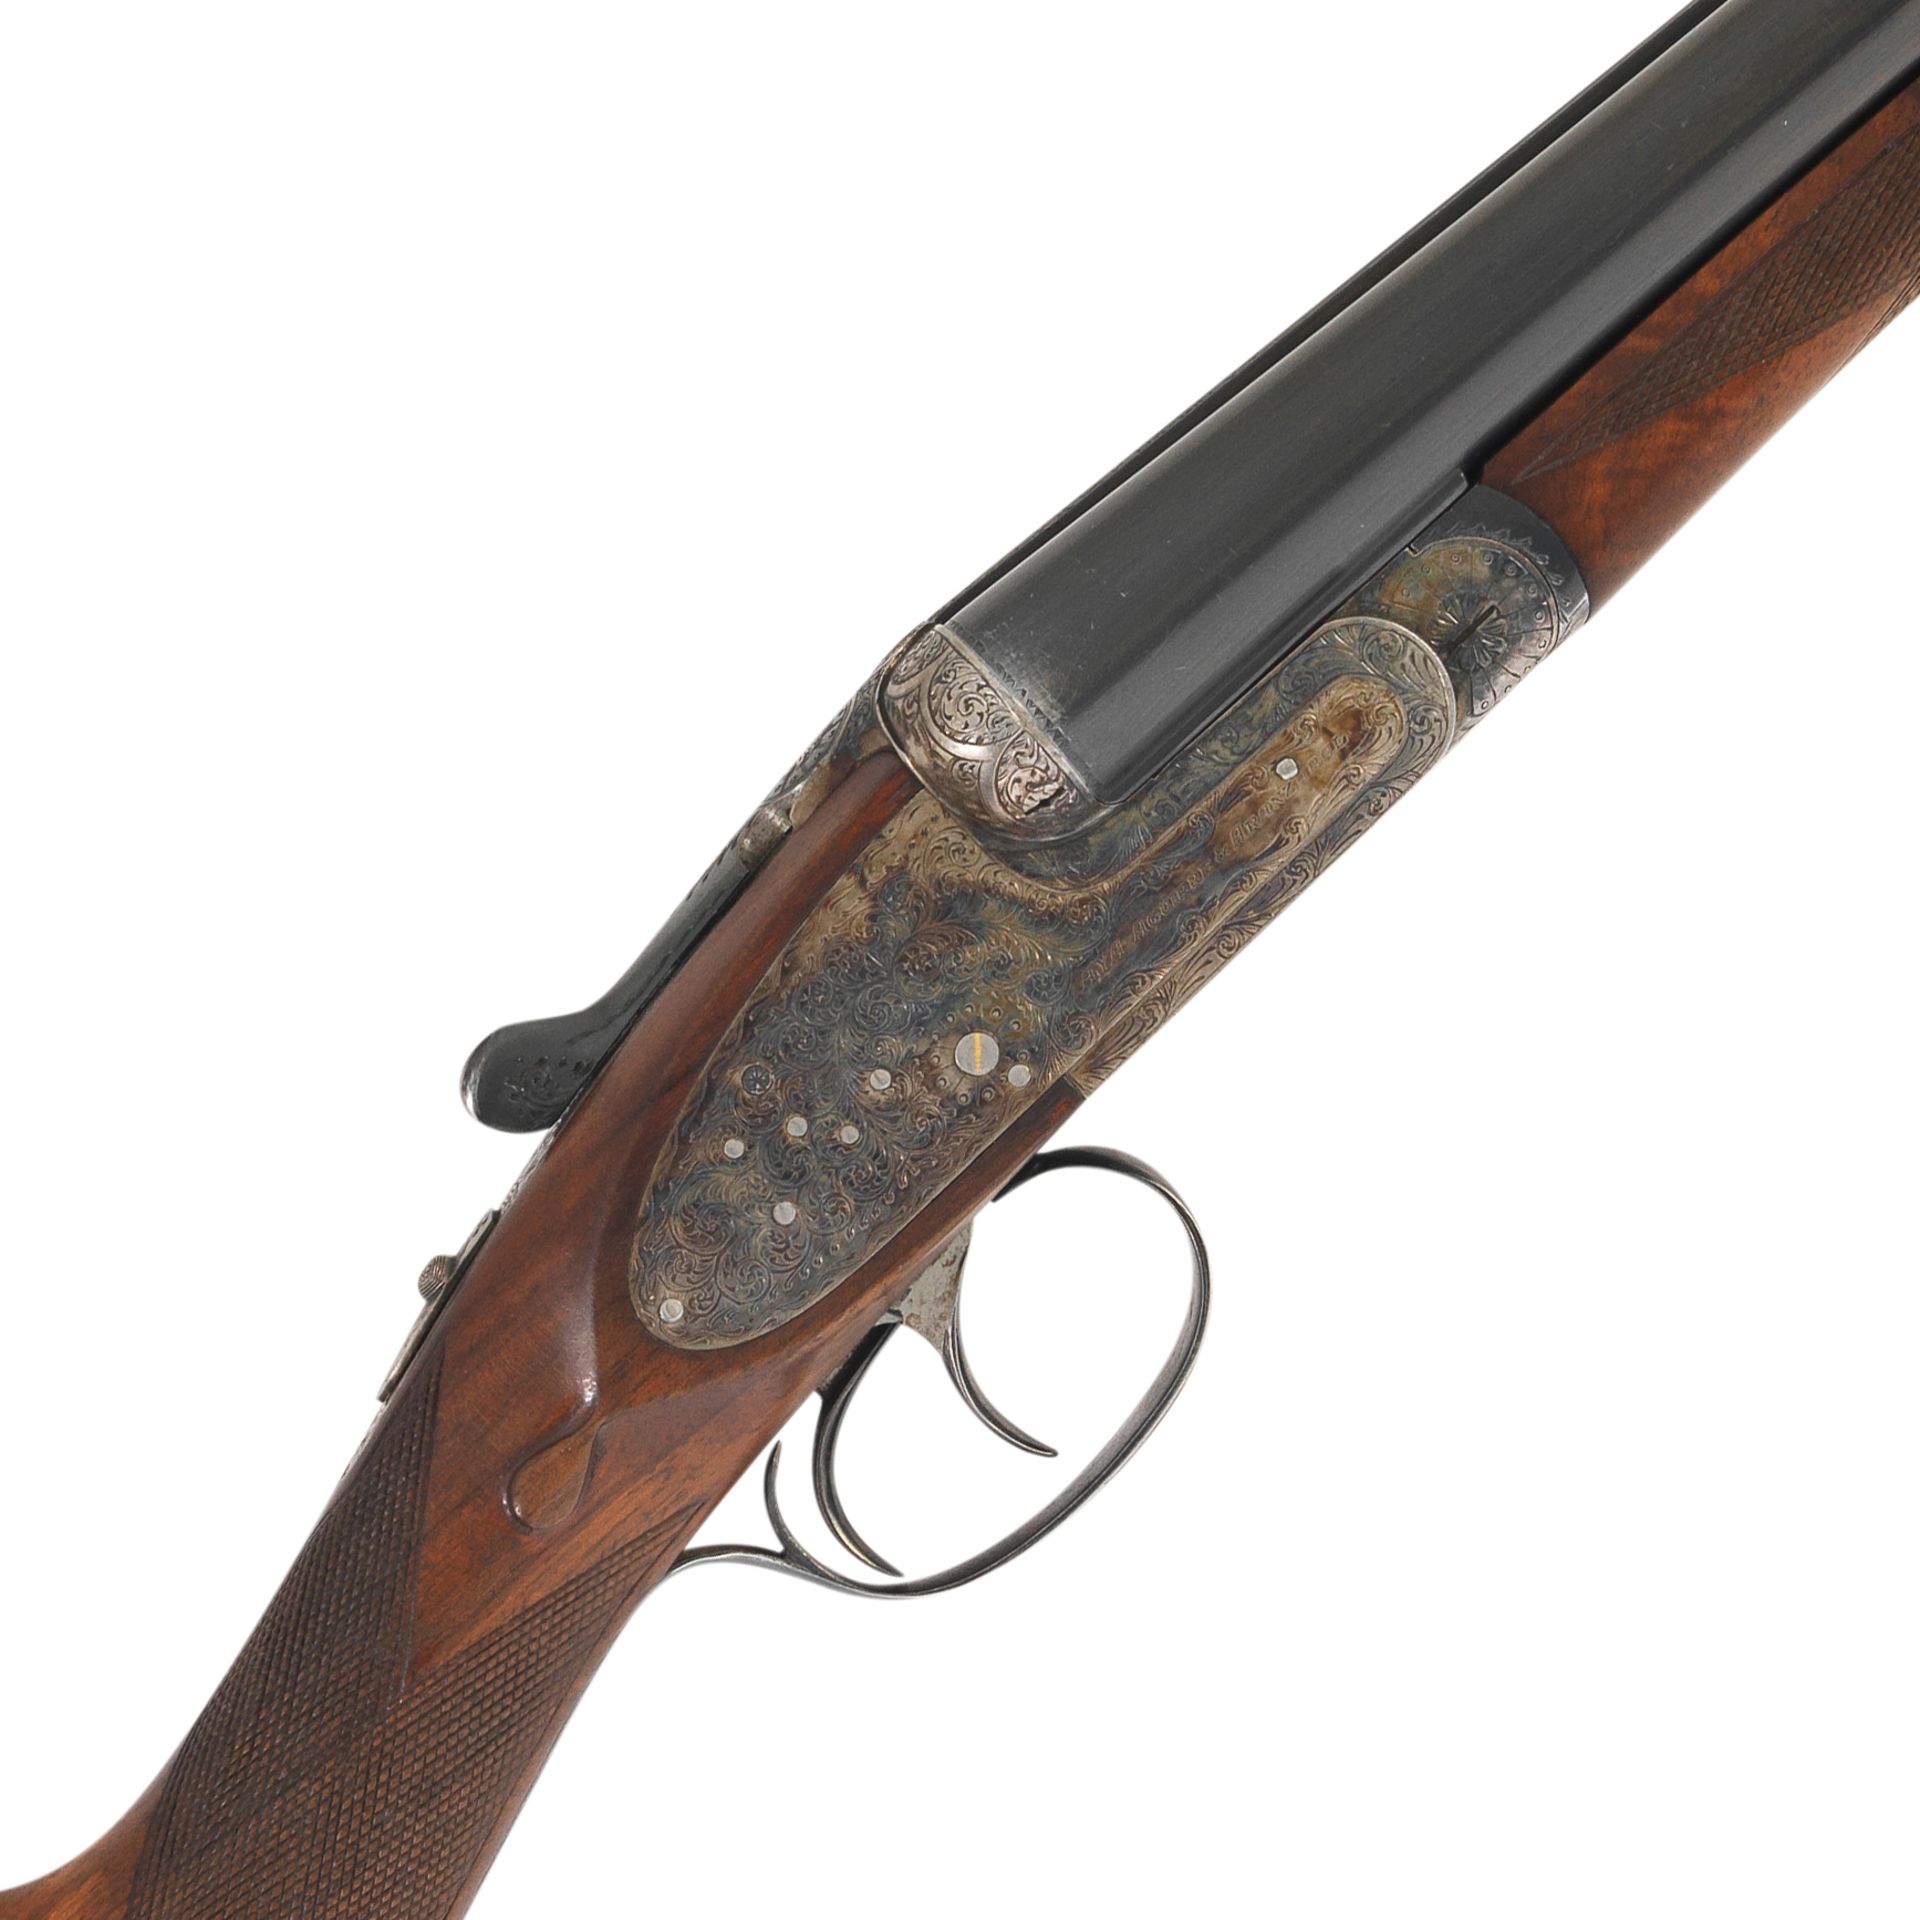 A 12-bore 'No.2' sidelock ejector gun by Aguirre Y Aranzabal, no. 410483 In a leather case